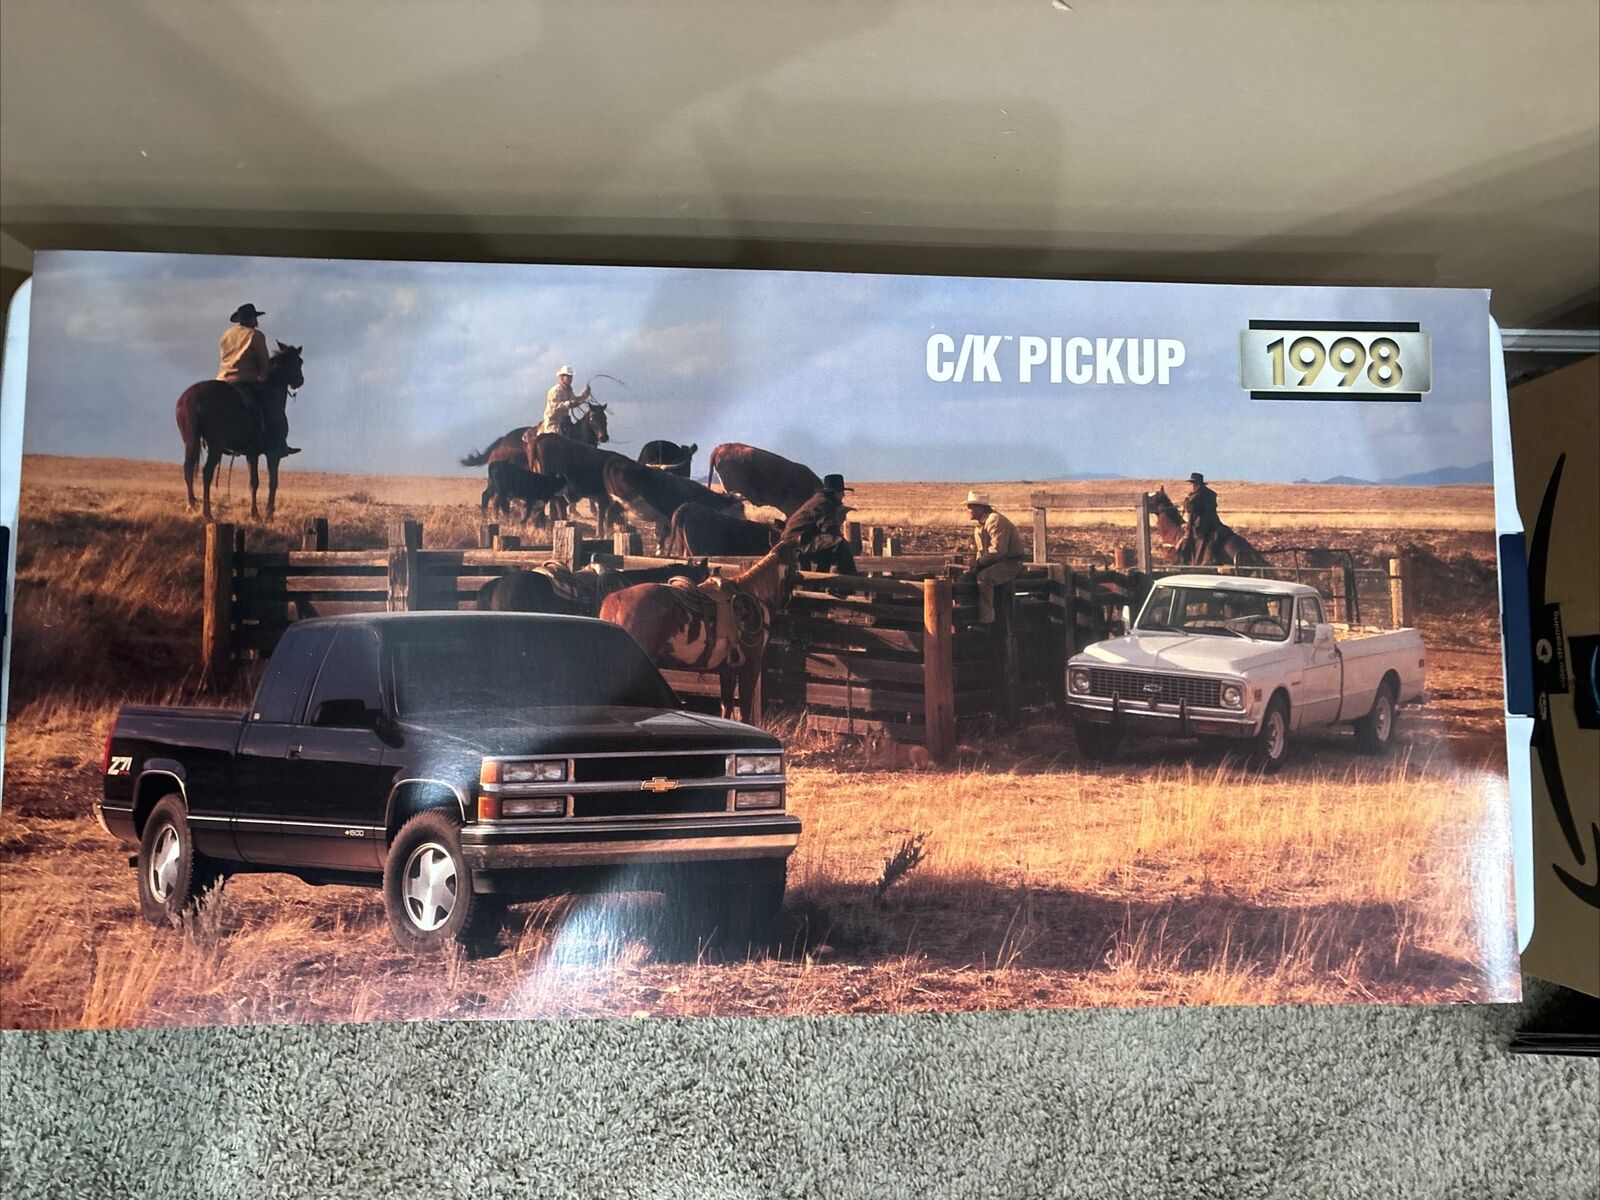 1998 Chevy Truck Dealership Poster 34x17 With 1971 Chevy Truck Or 1972 Truck